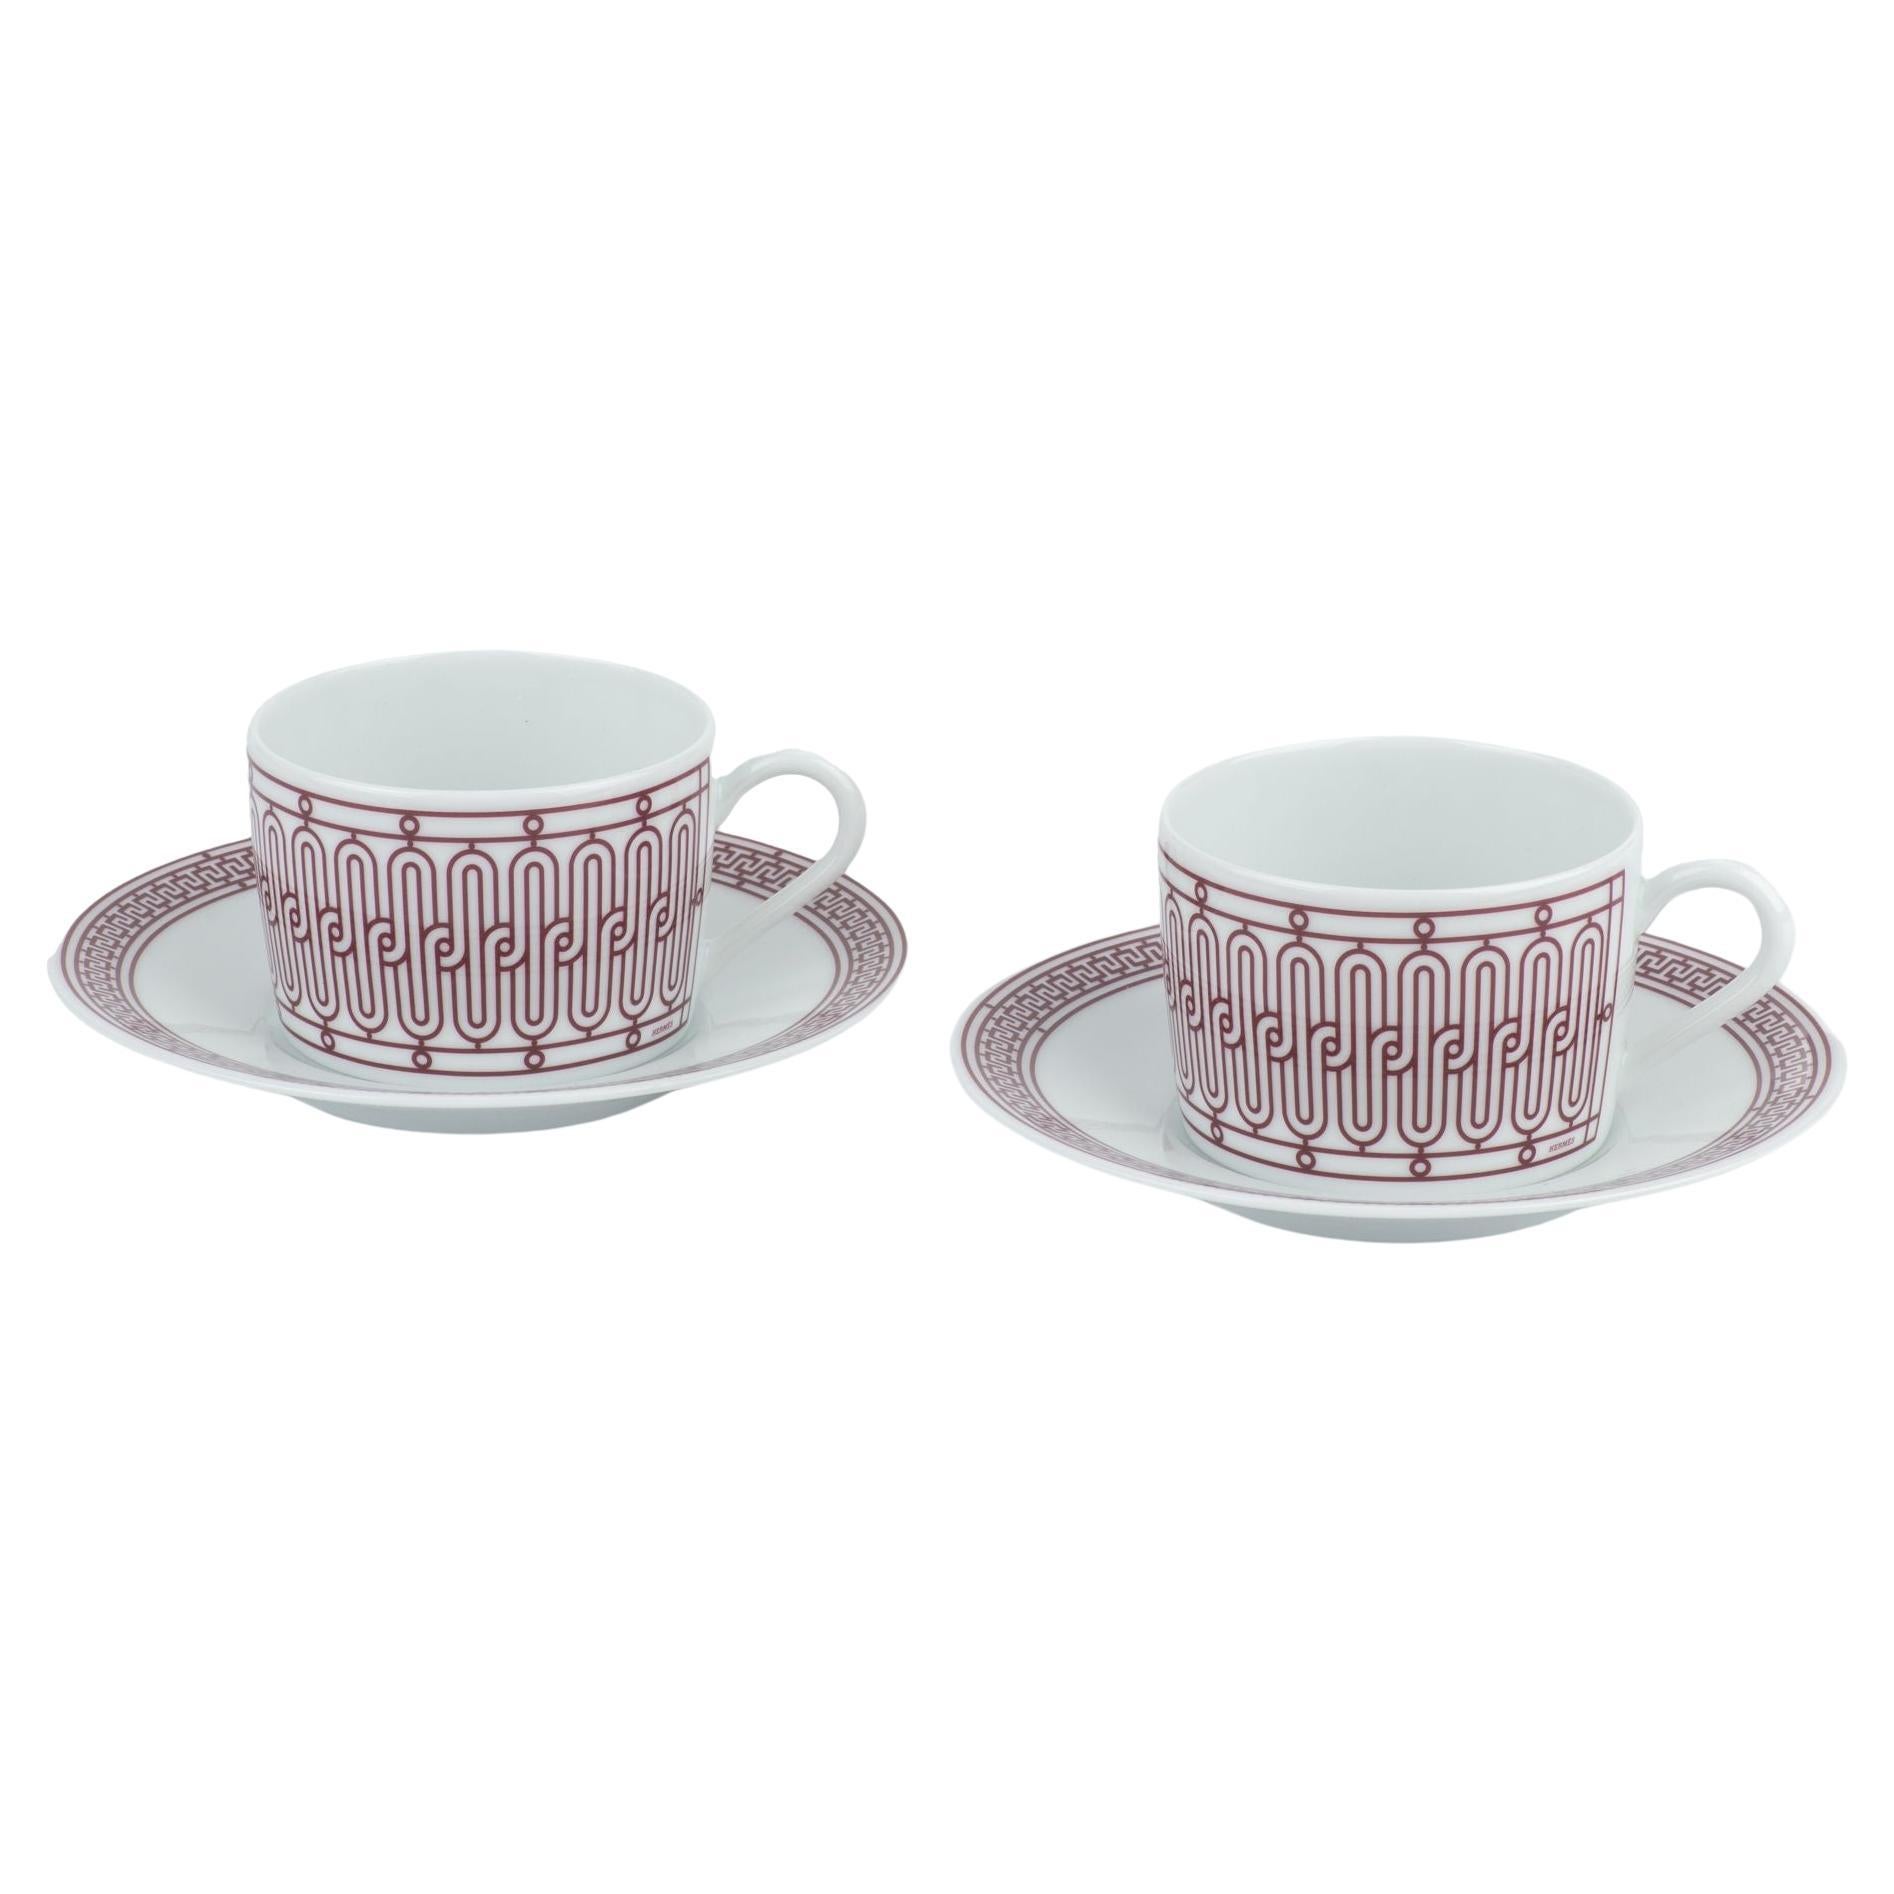 The Hermès Porcelain H Deco Tea Cup and Saucer set of two in Rouge. The set features a bold geometric design with an Hermès logo. Brand new .
Comes with booklet, ribbon and original box.